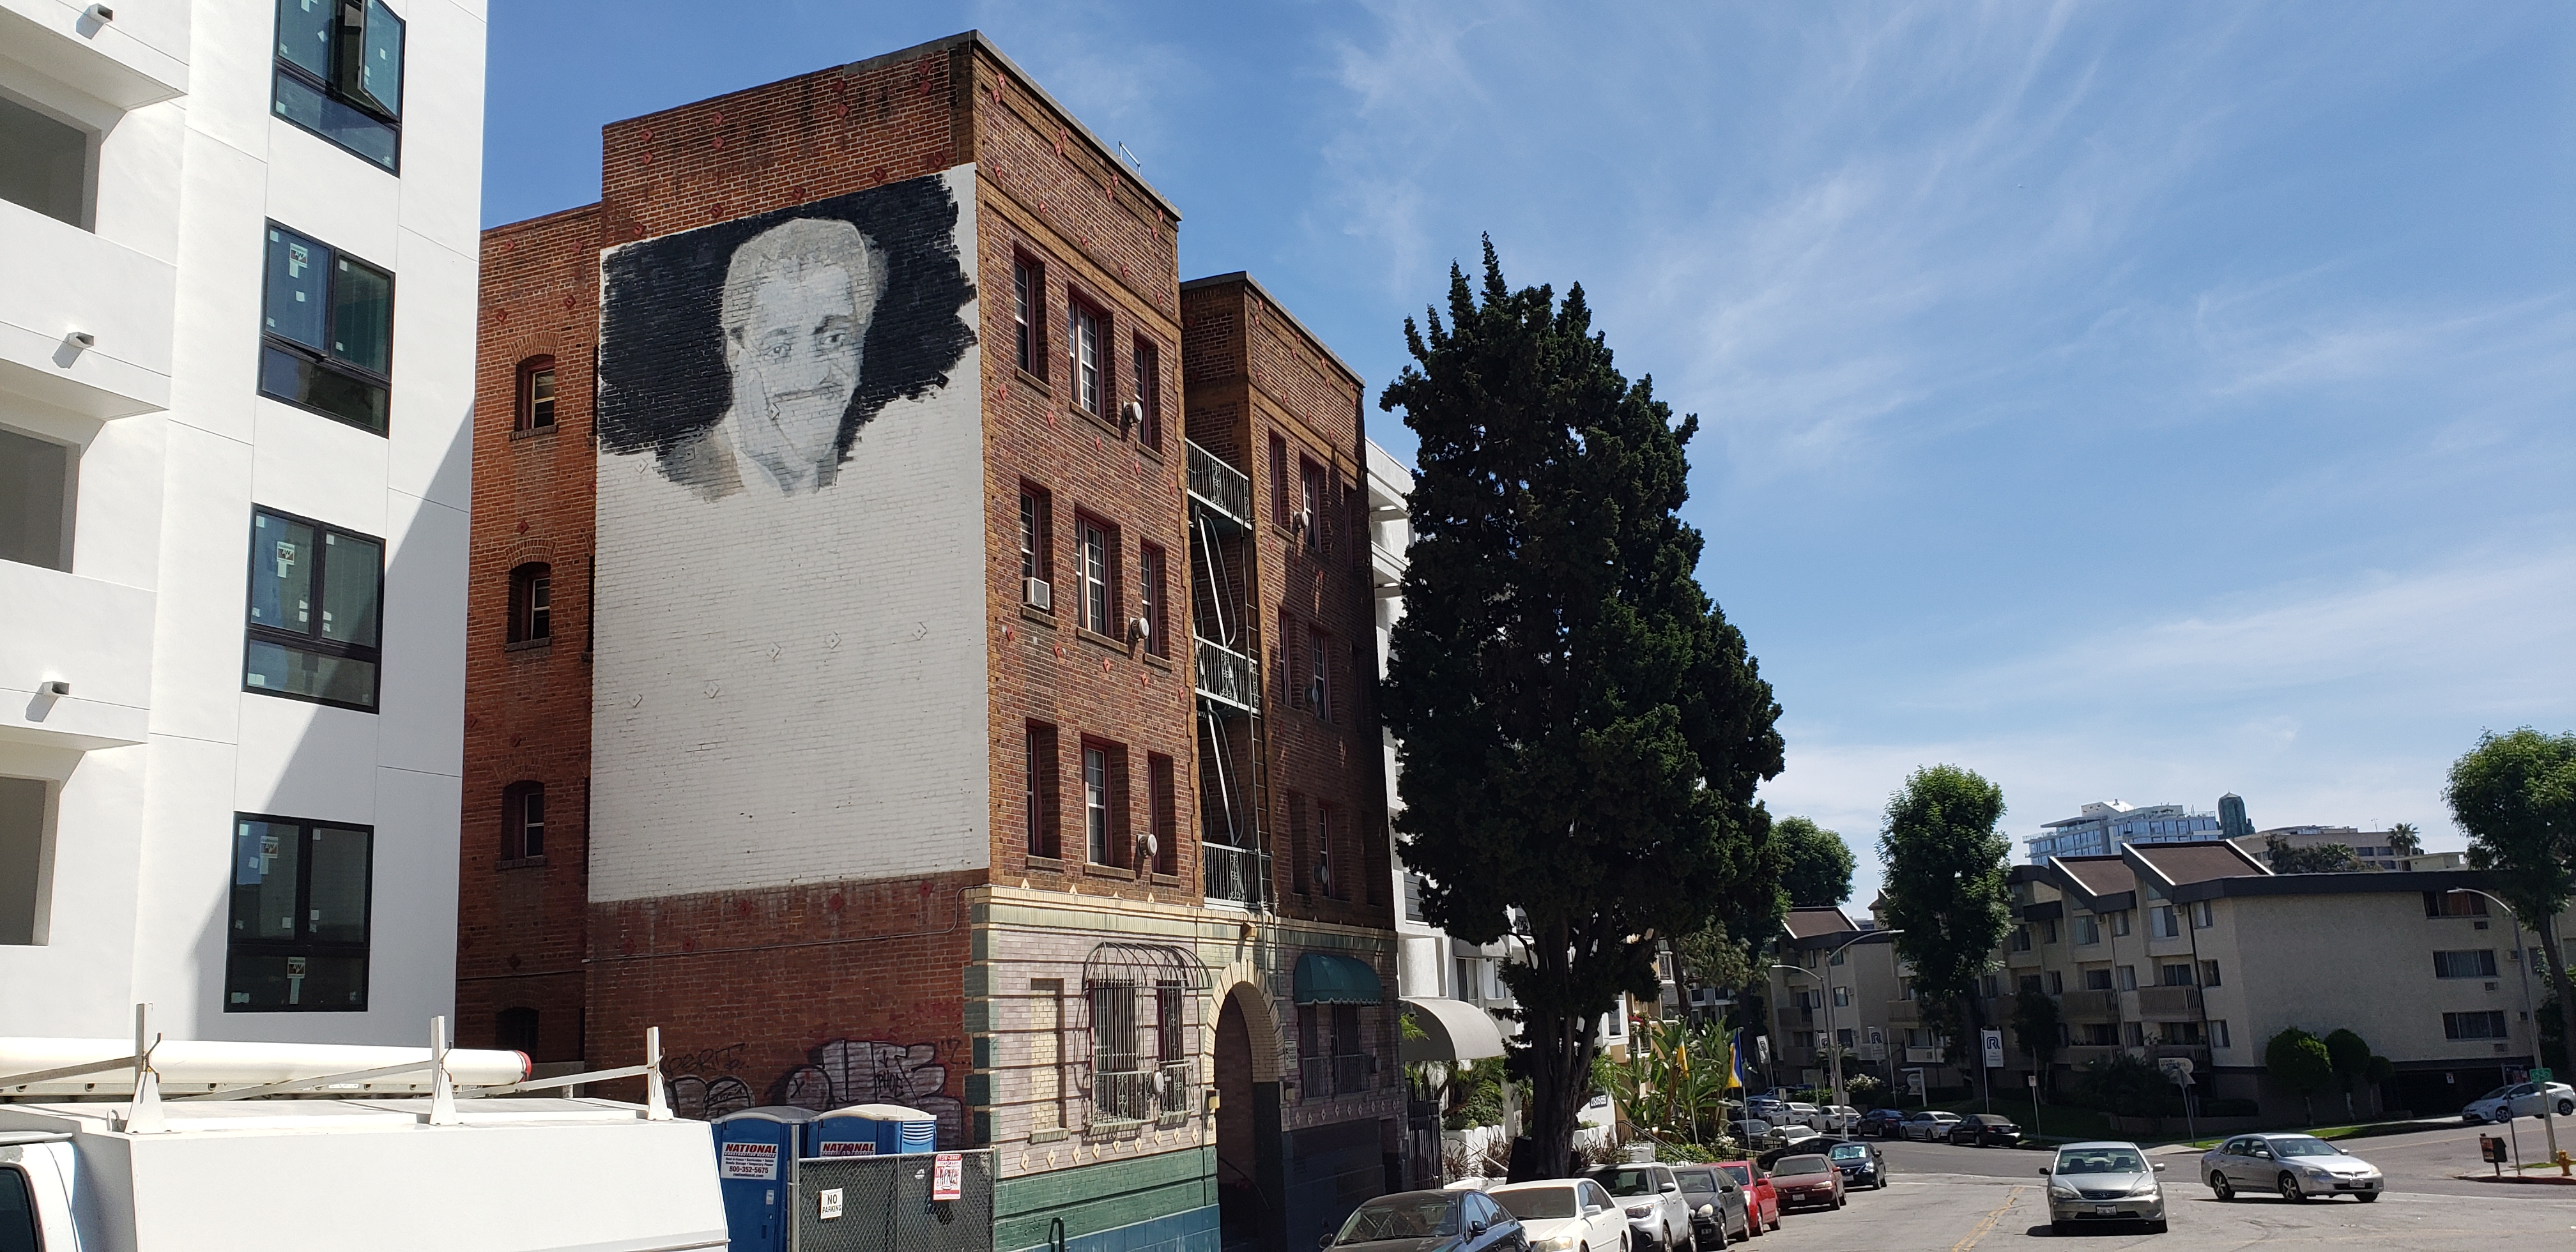 Street view of Reno Apartments with an unfinished mural of Sammy Davis Jr on the side of the building and large tree in front.